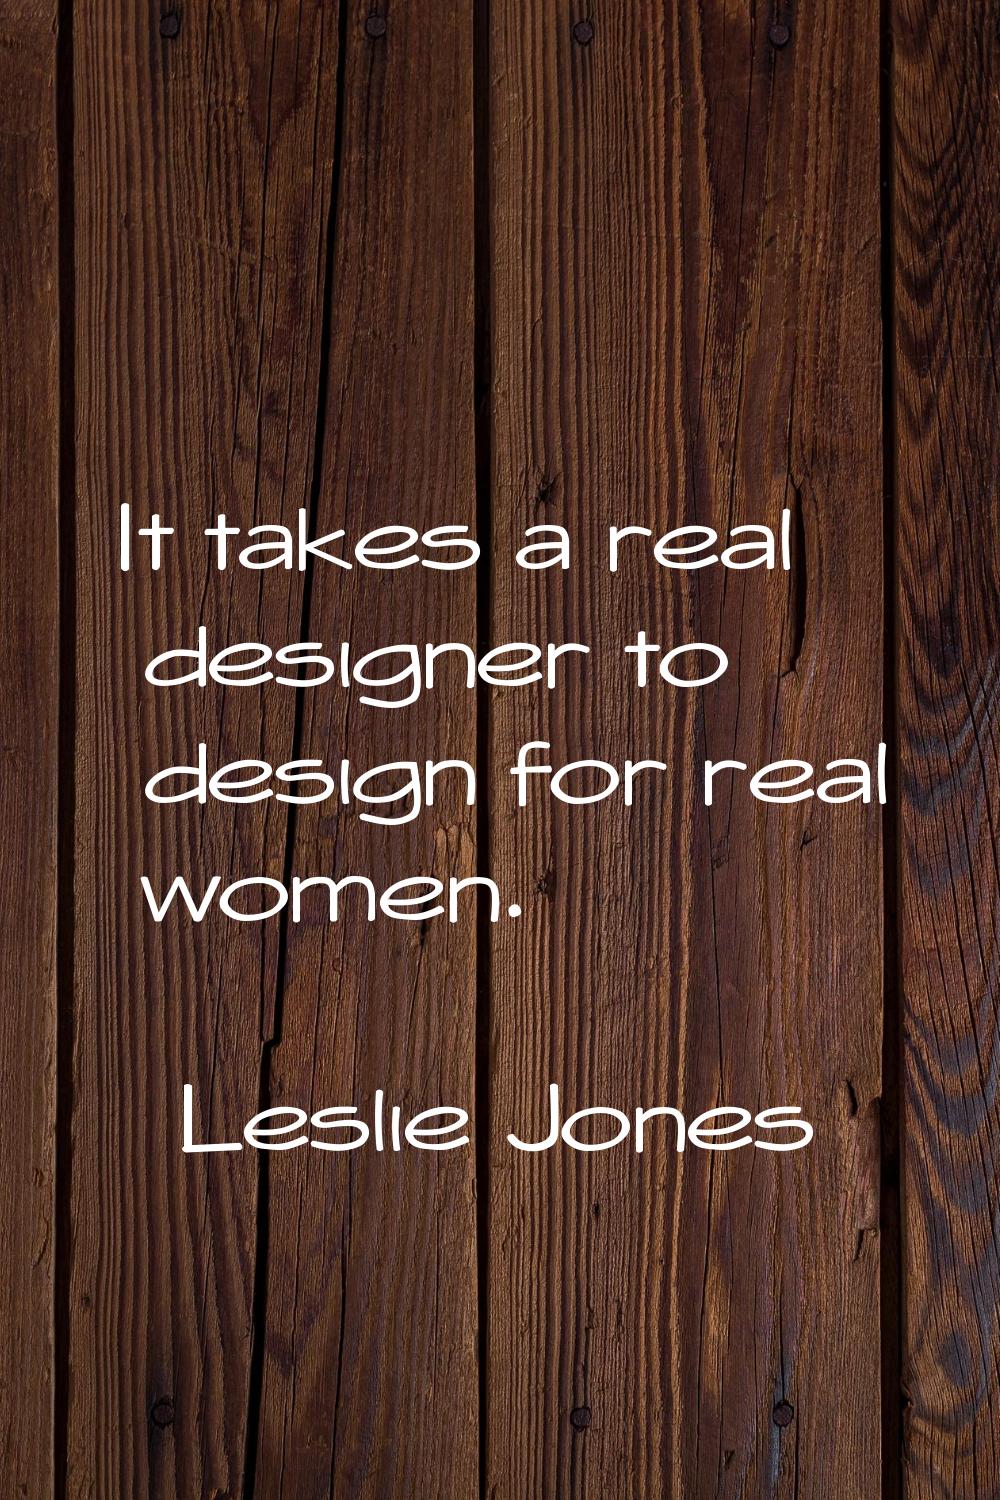 It takes a real designer to design for real women.